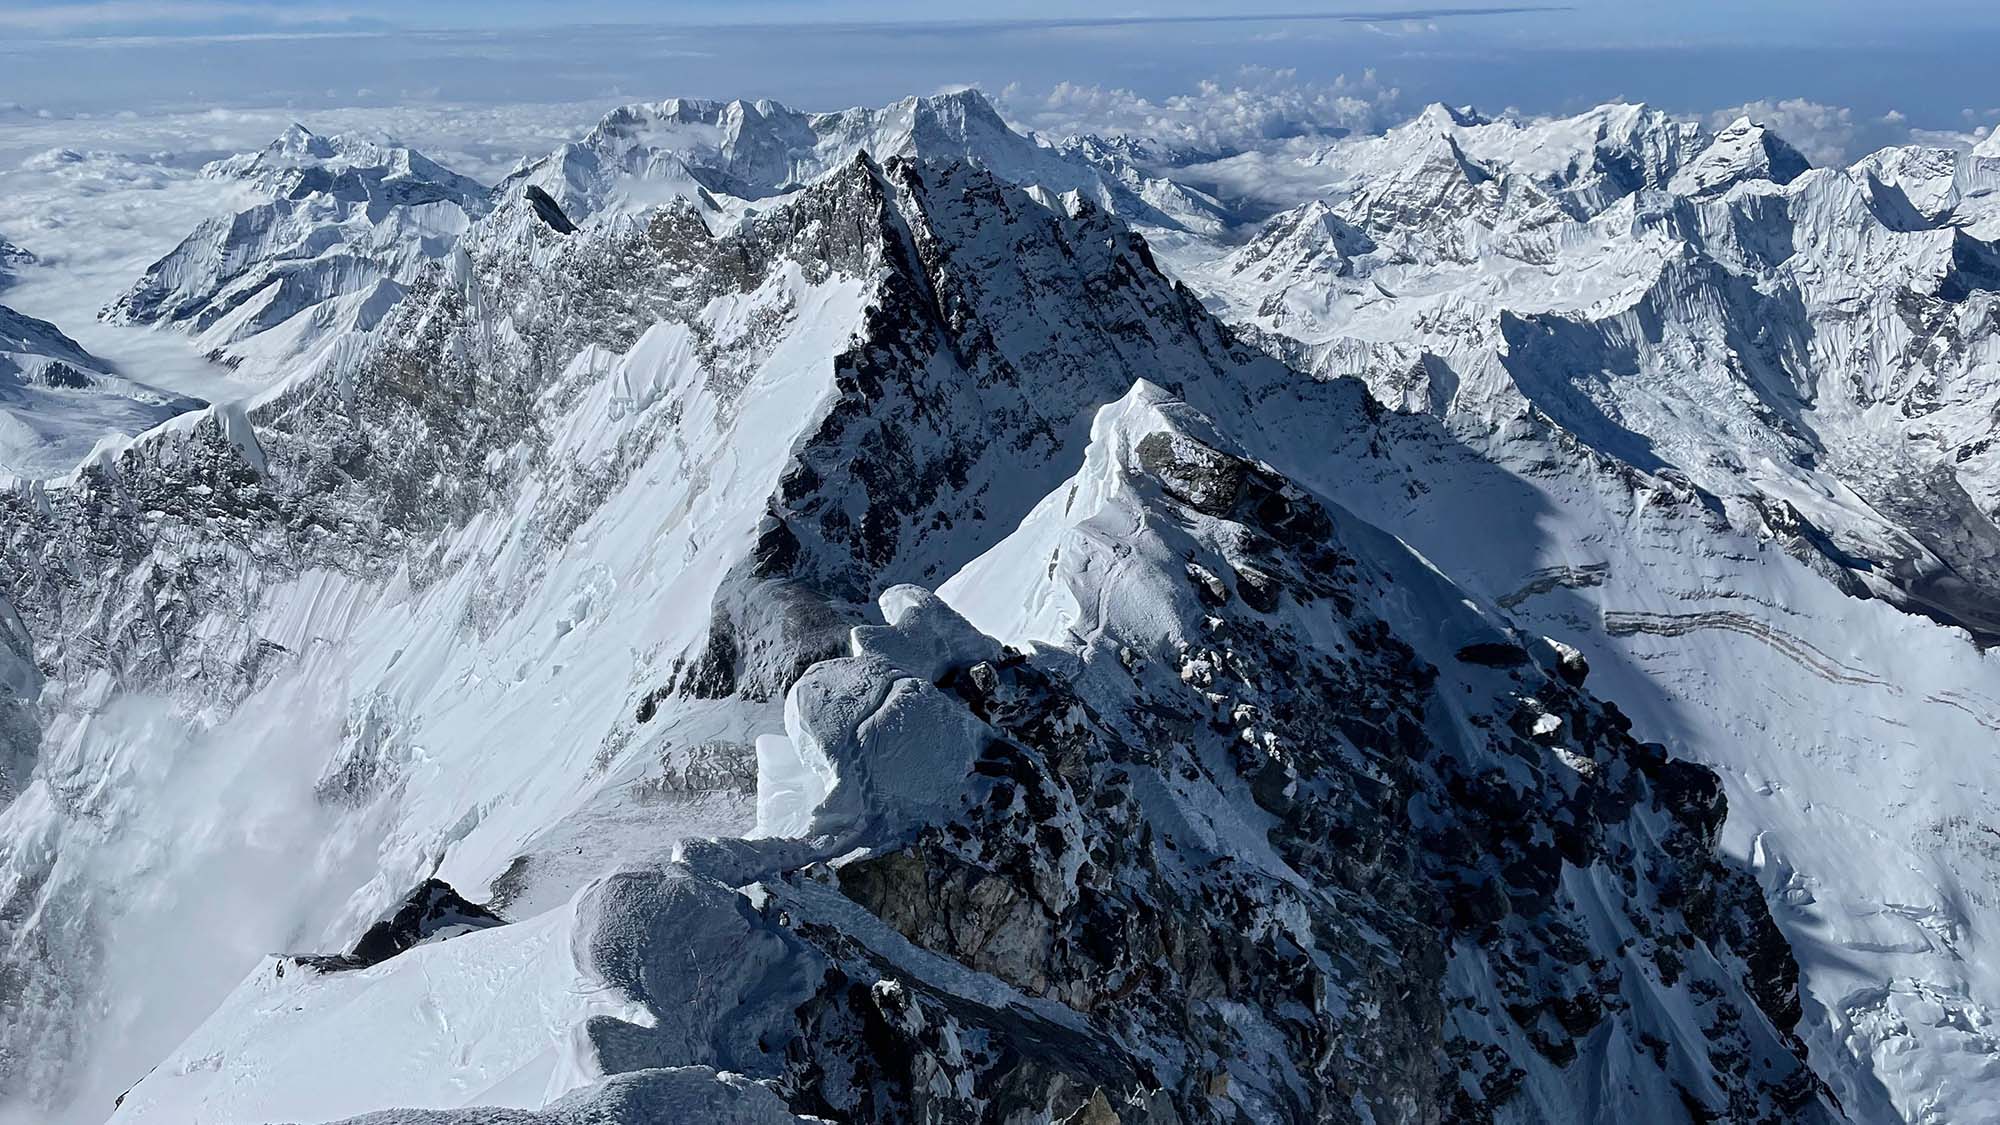 The Himalayan range as seen from the summit of Mount Everest